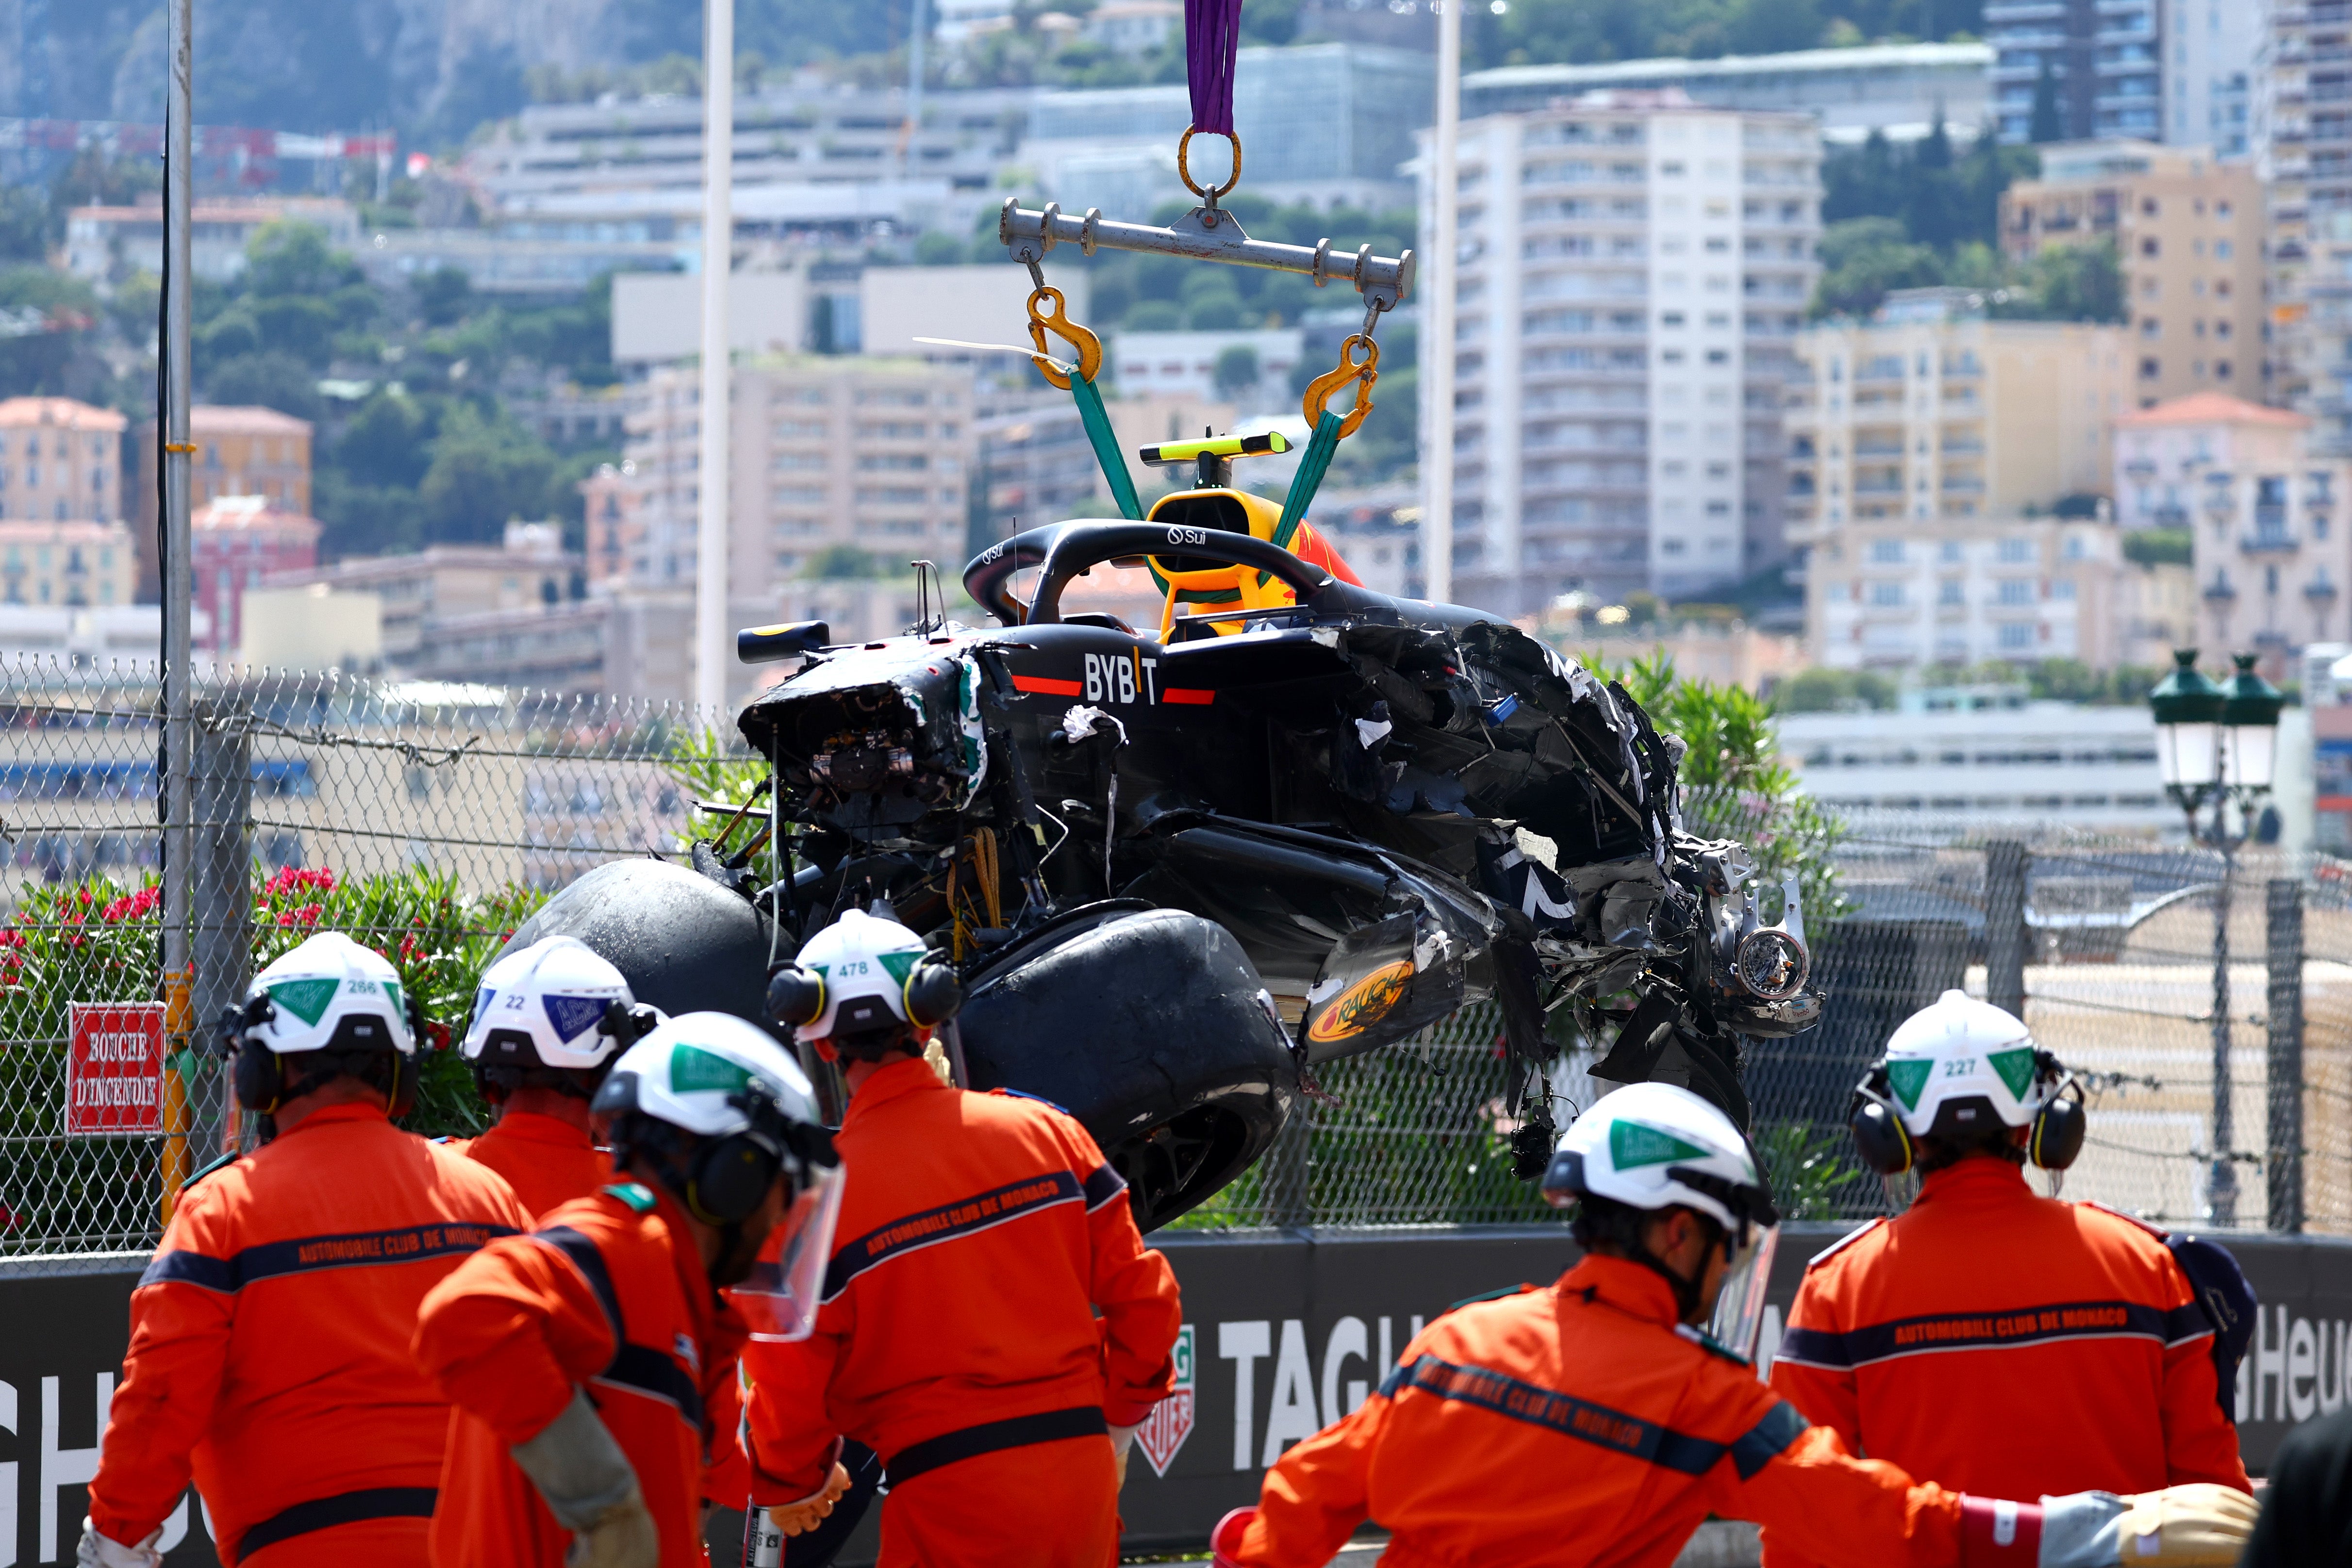 Sergio Perez’s car was left in tatters after a huge crash at the start of the Monaco Grand Prix